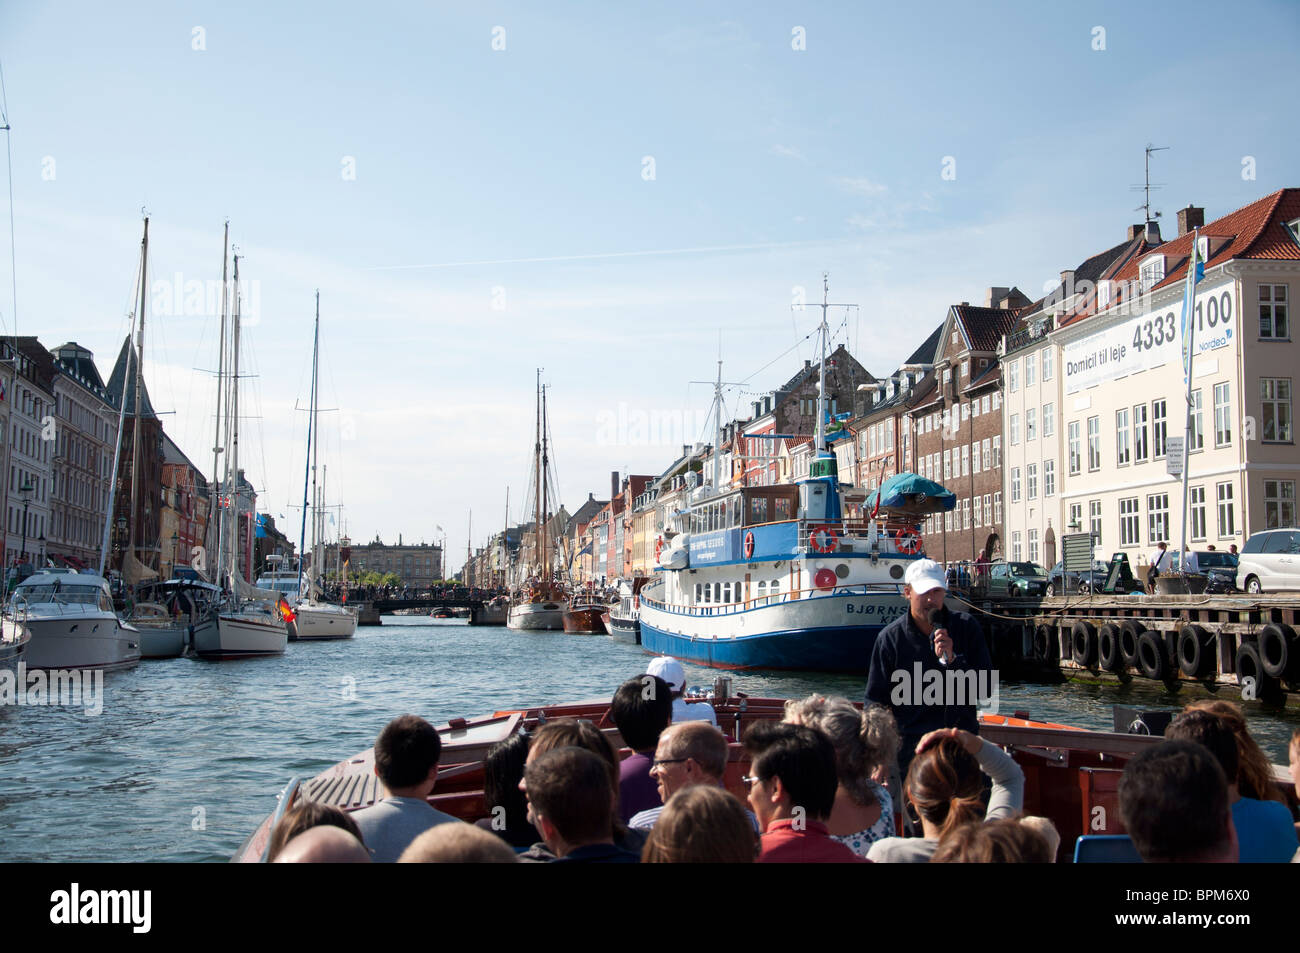 A view of the buildings and Nyhavn canal in Nyhavn Harbour, Copenhagen, Denmark. Stock Photo